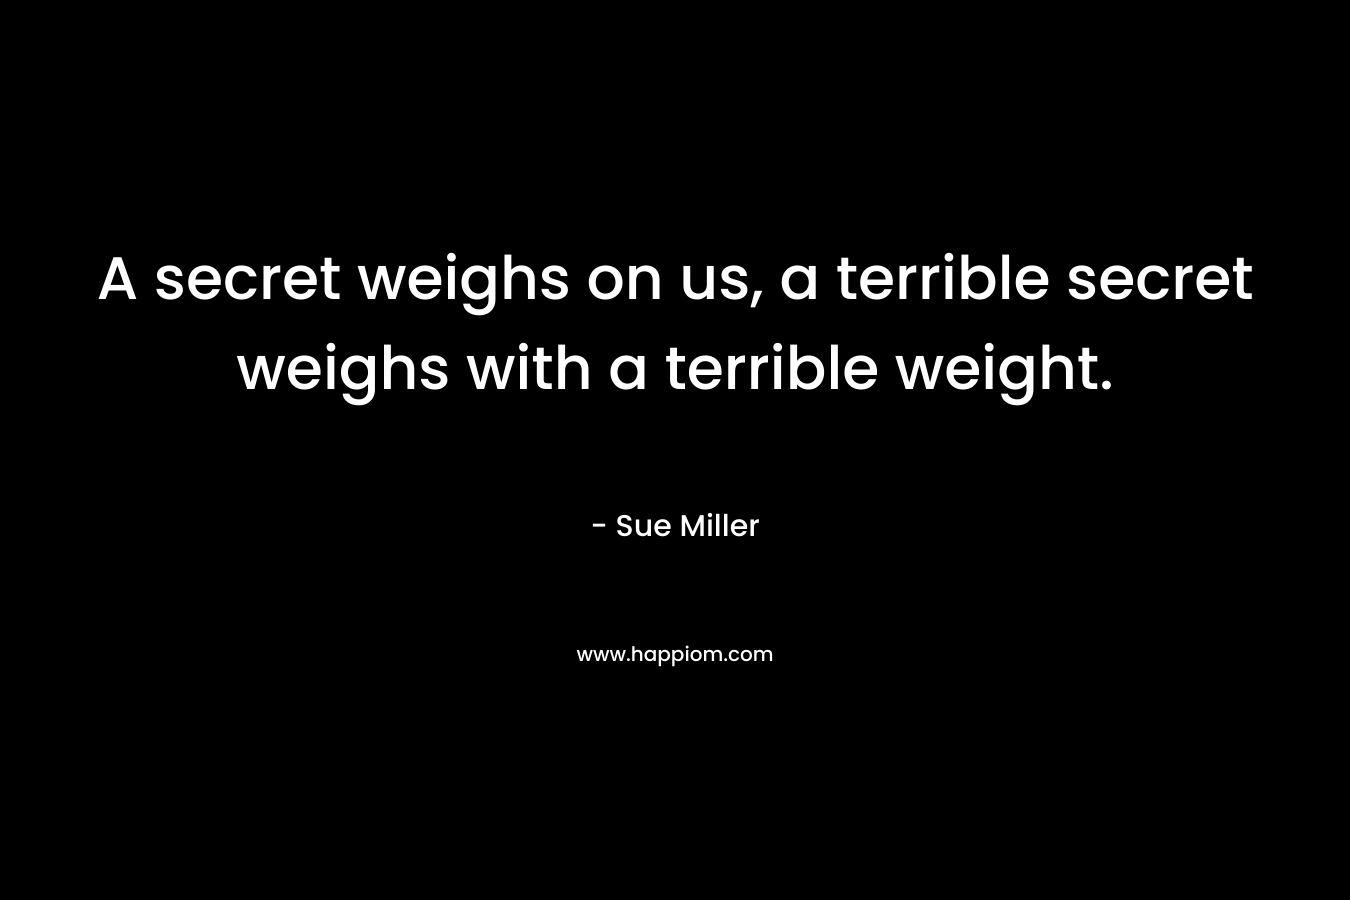 A secret weighs on us, a terrible secret weighs with a terrible weight.